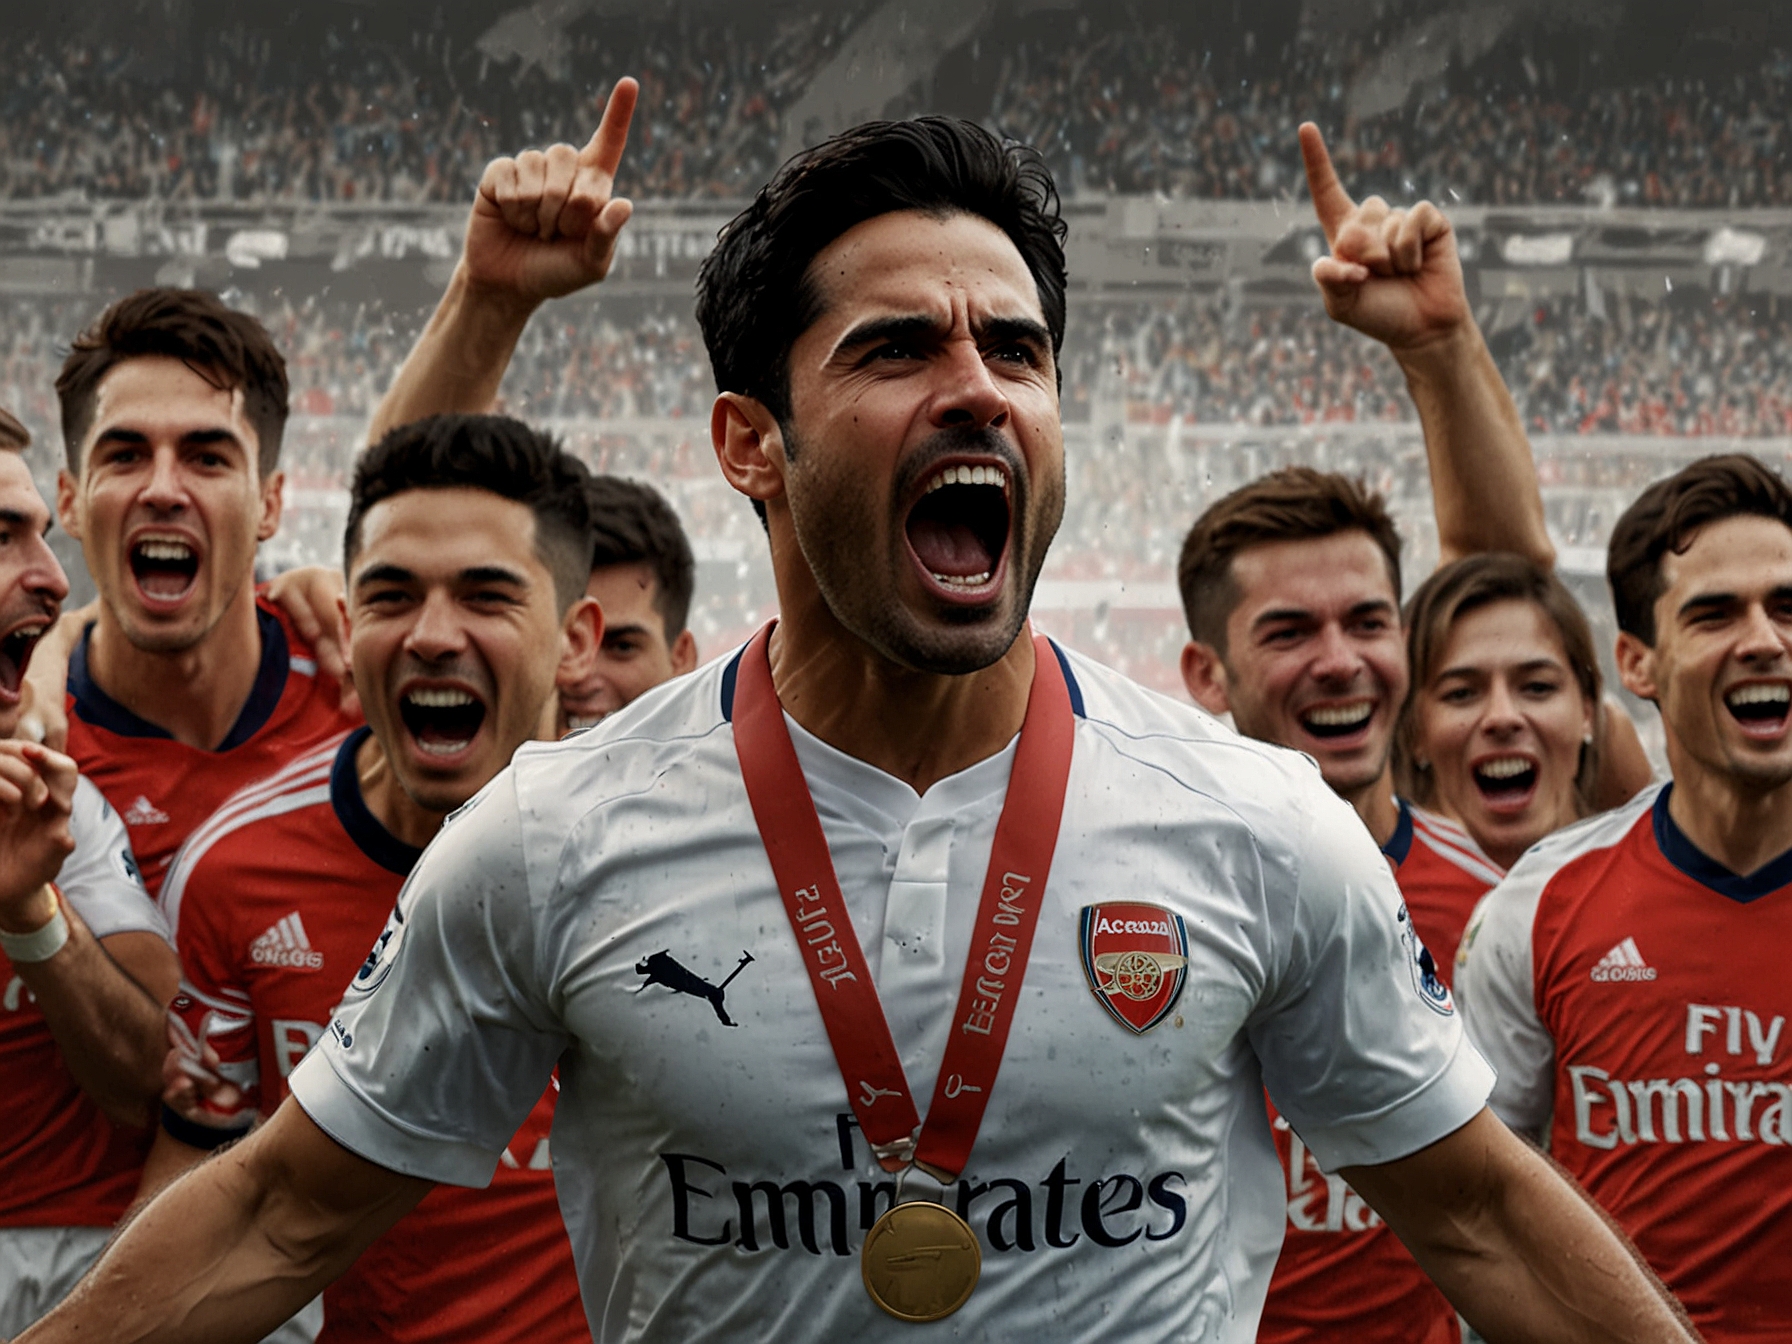 Arsenal's manager Mikel Arteta celebrating with players, symbolizing the club's focus on nurturing young talent and its recent resurgence on the domestic and European fronts.